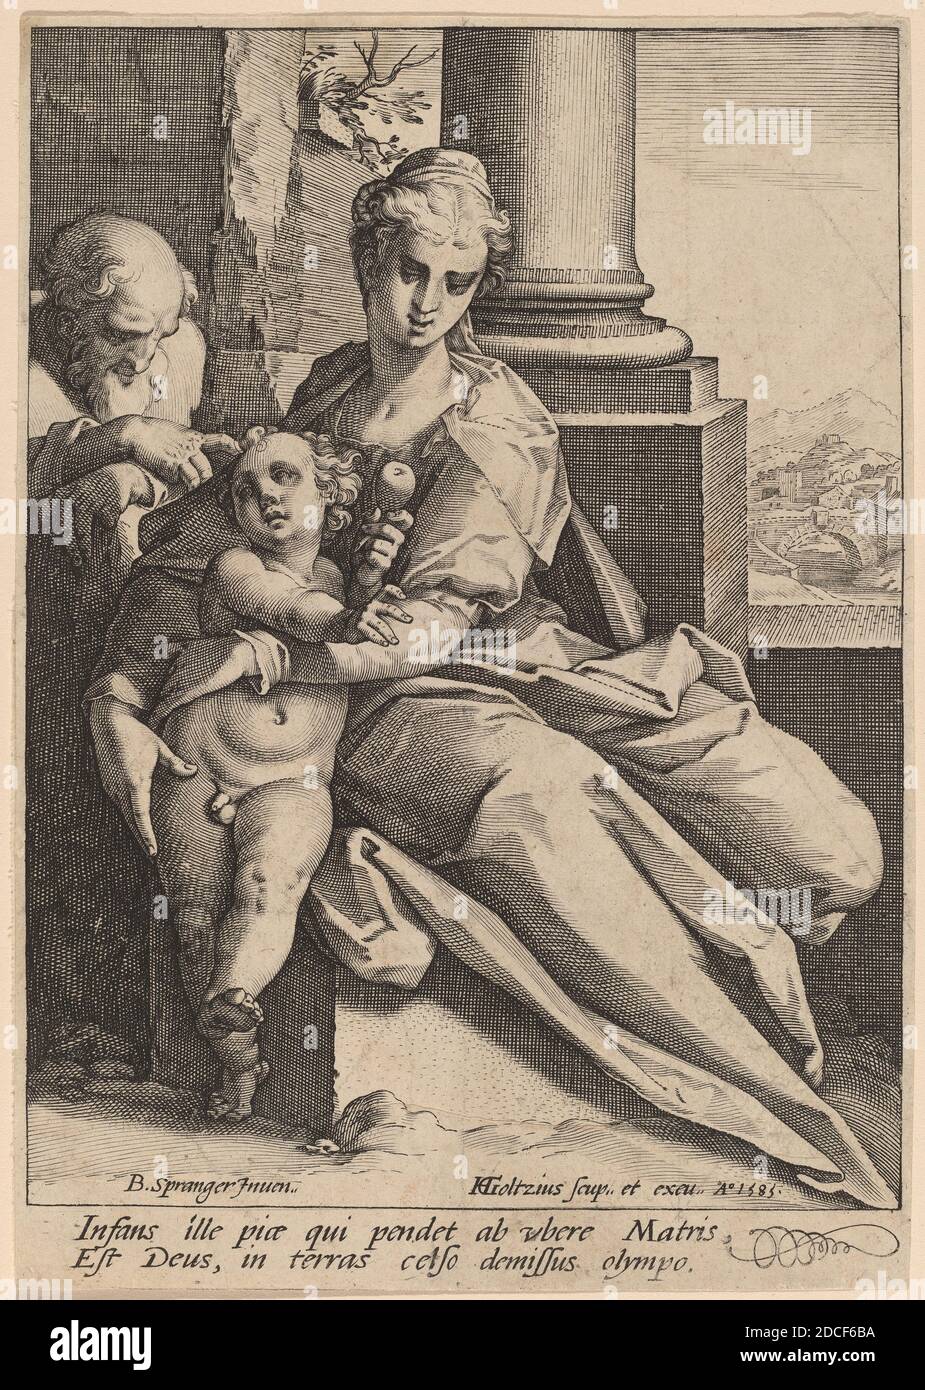 Hendrick Goltzius, (artist), Dutch, 1558 - 1617, Bartholomaeus Spranger, (artist after), Flemish, 1546 - 1611, The Holy Family, 1585, engraving on laid paper, sheet (trimmed within plate mark): 16.7 x 11.8 cm (6 9/16 x 4 5/8 in Stock Photo